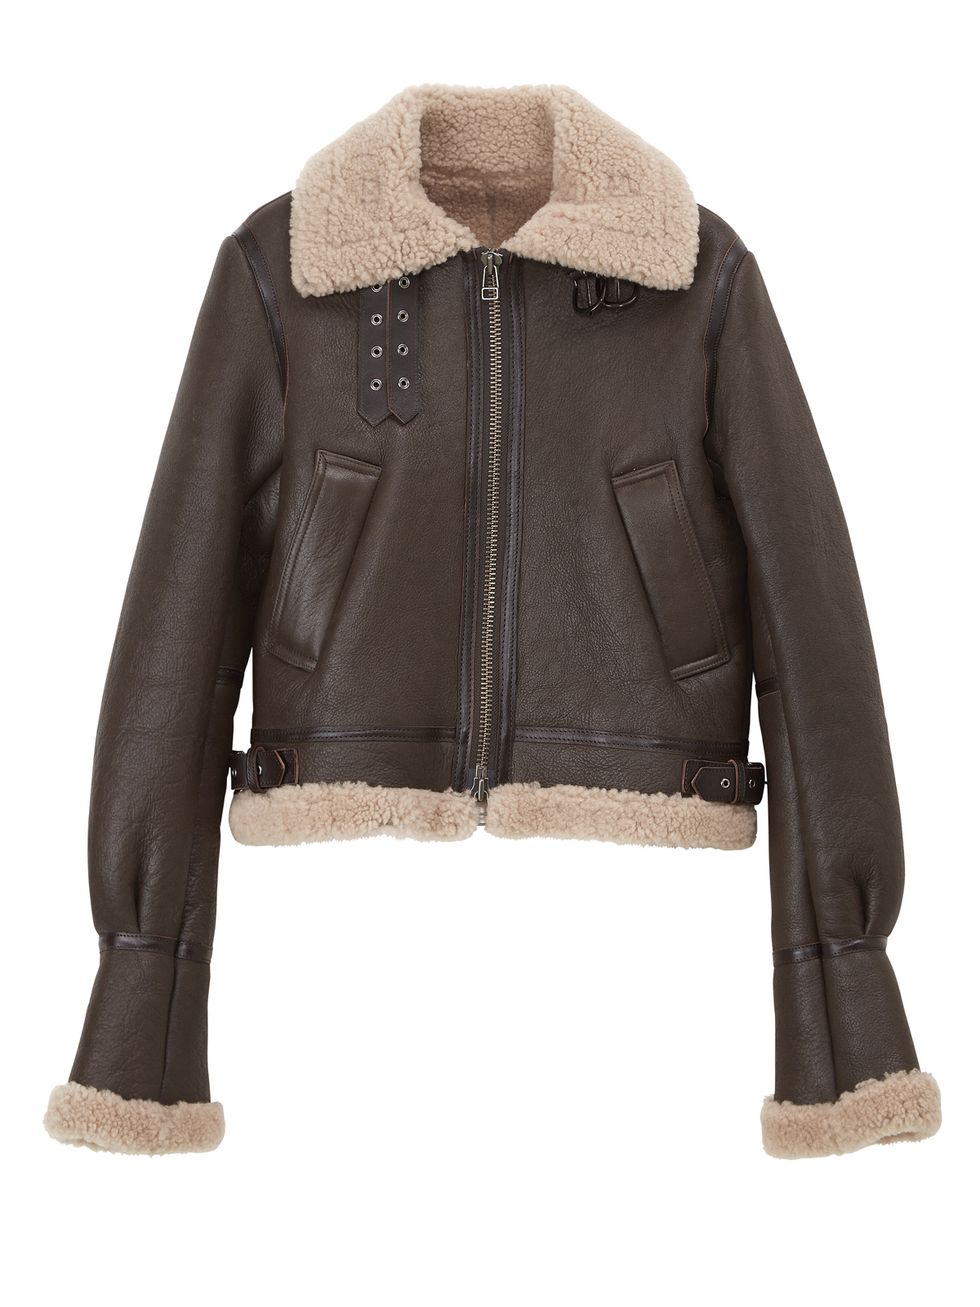 Clothing, Jacket, Outerwear, Sleeve, Leather jacket, Leather, Brown, Fur, Beige, Collar, 